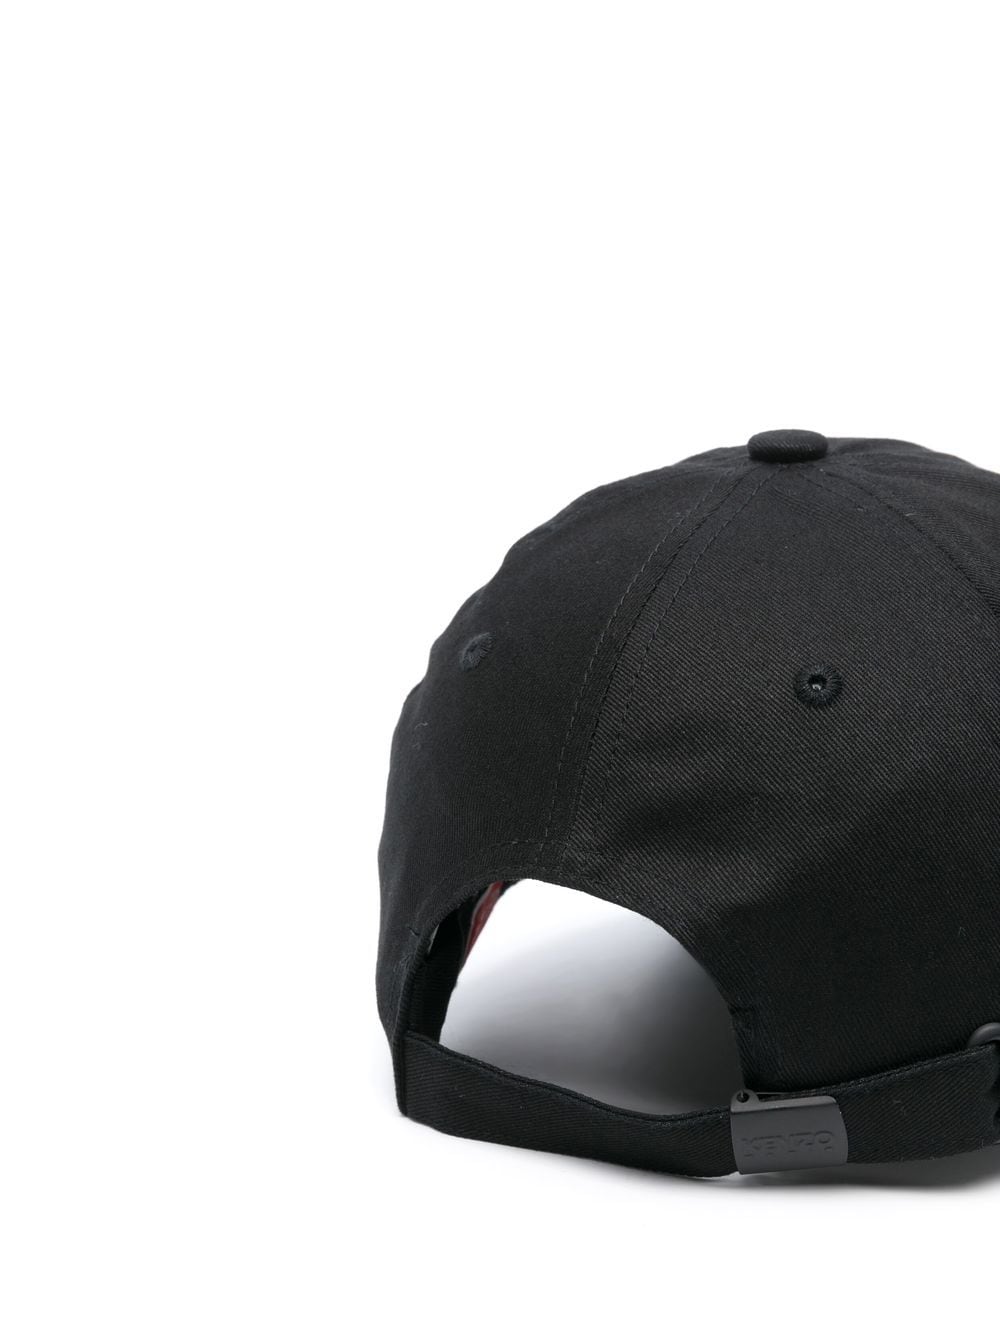 Kenzo Embroidered Hat in Black